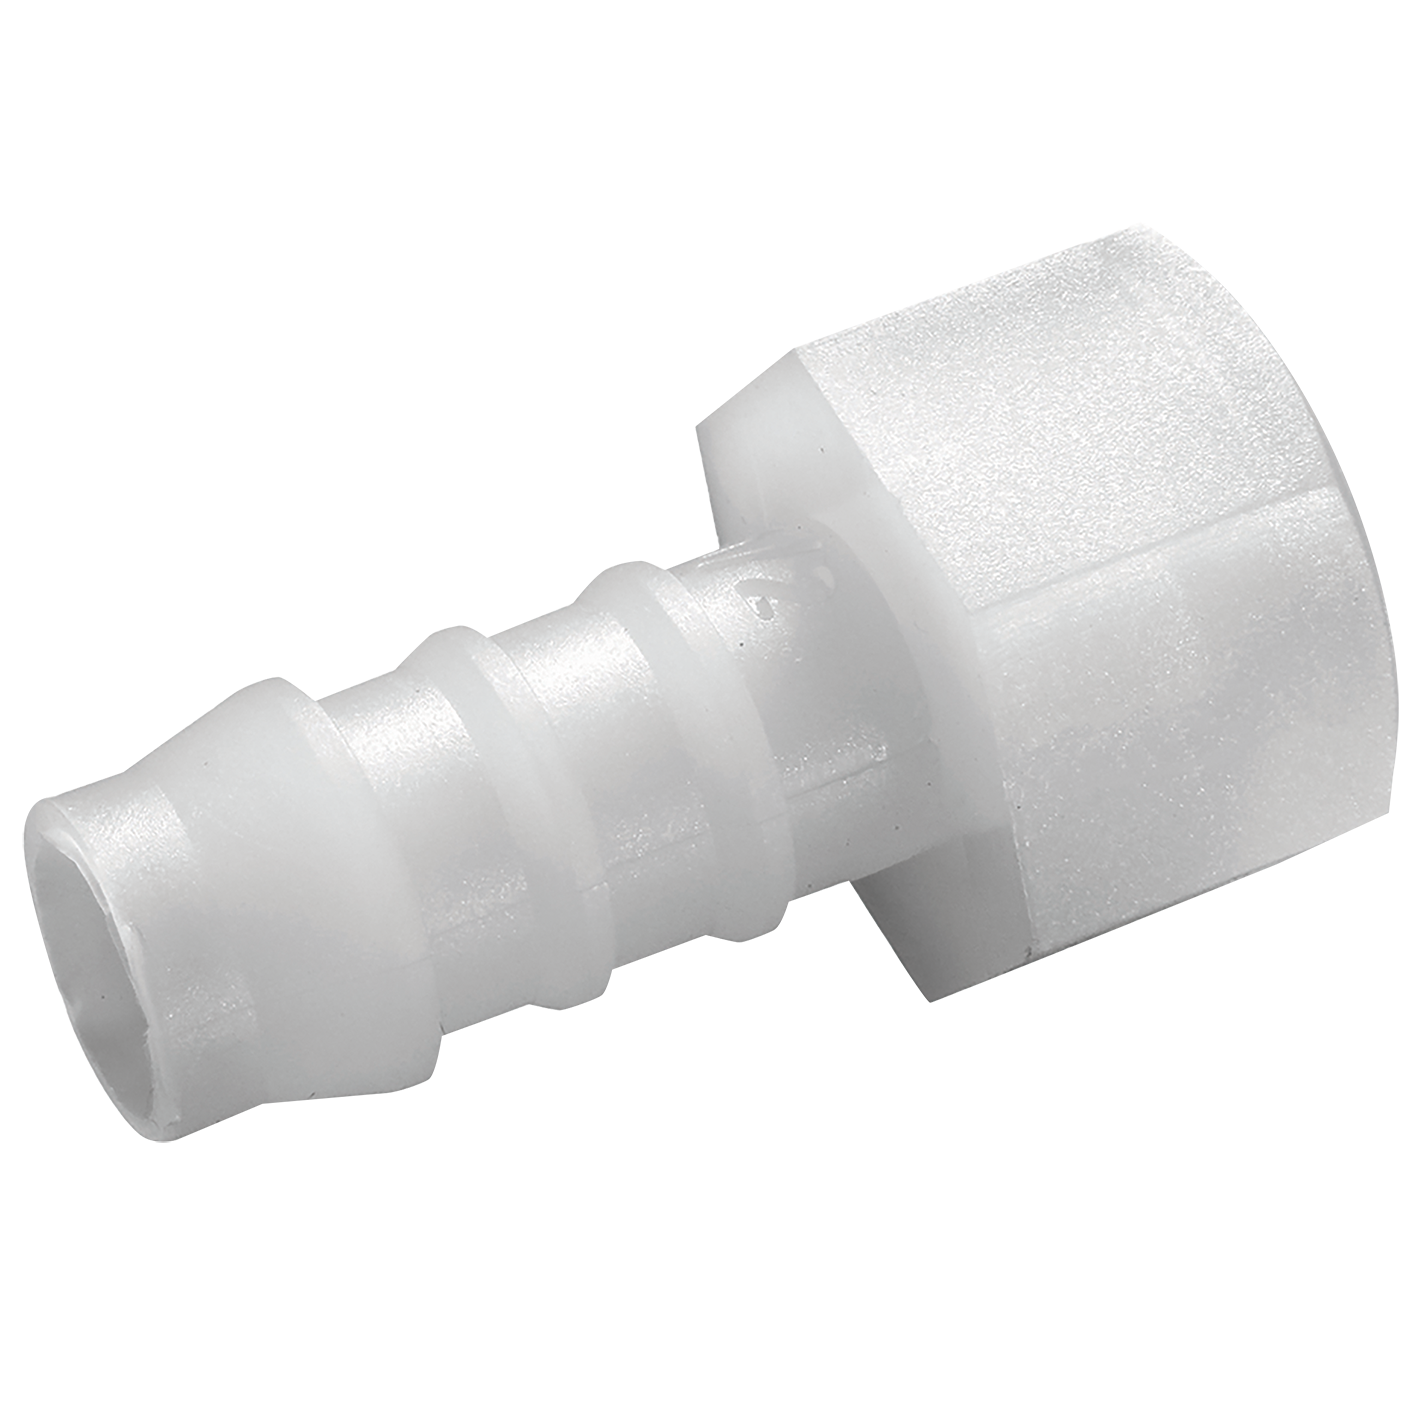 1/4" BSPT Female x Hose Connector